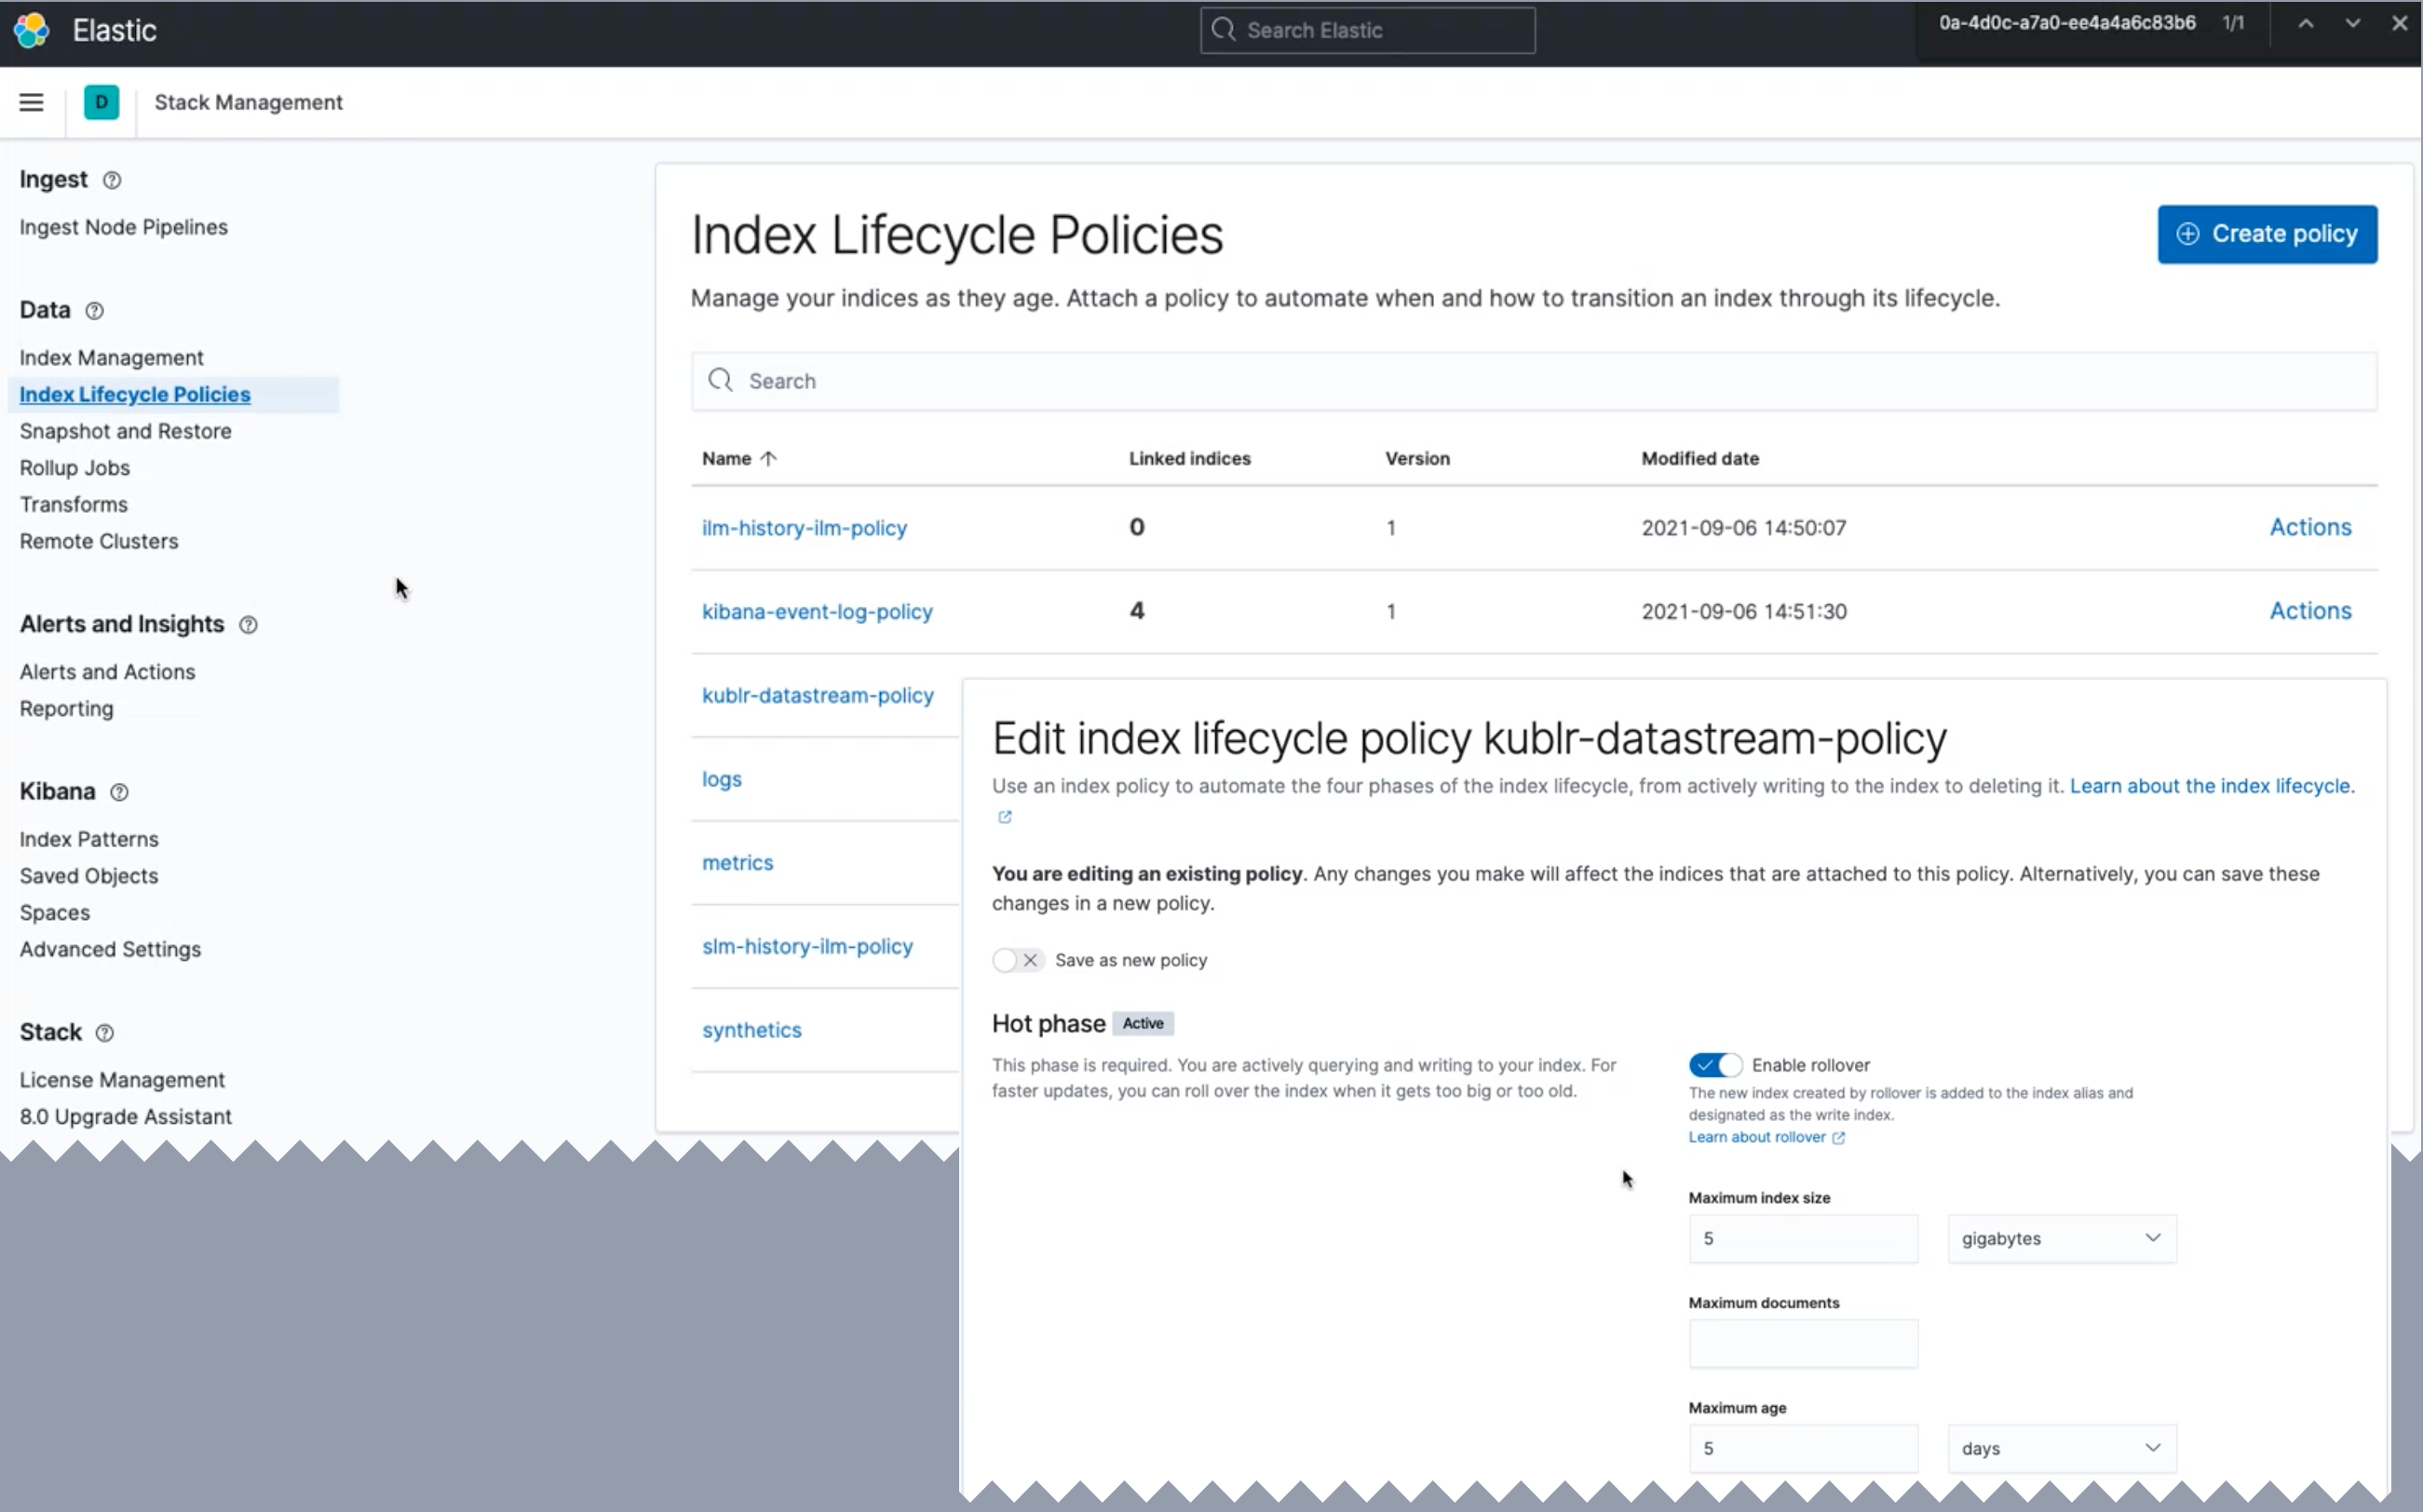 Index lifecycle policies